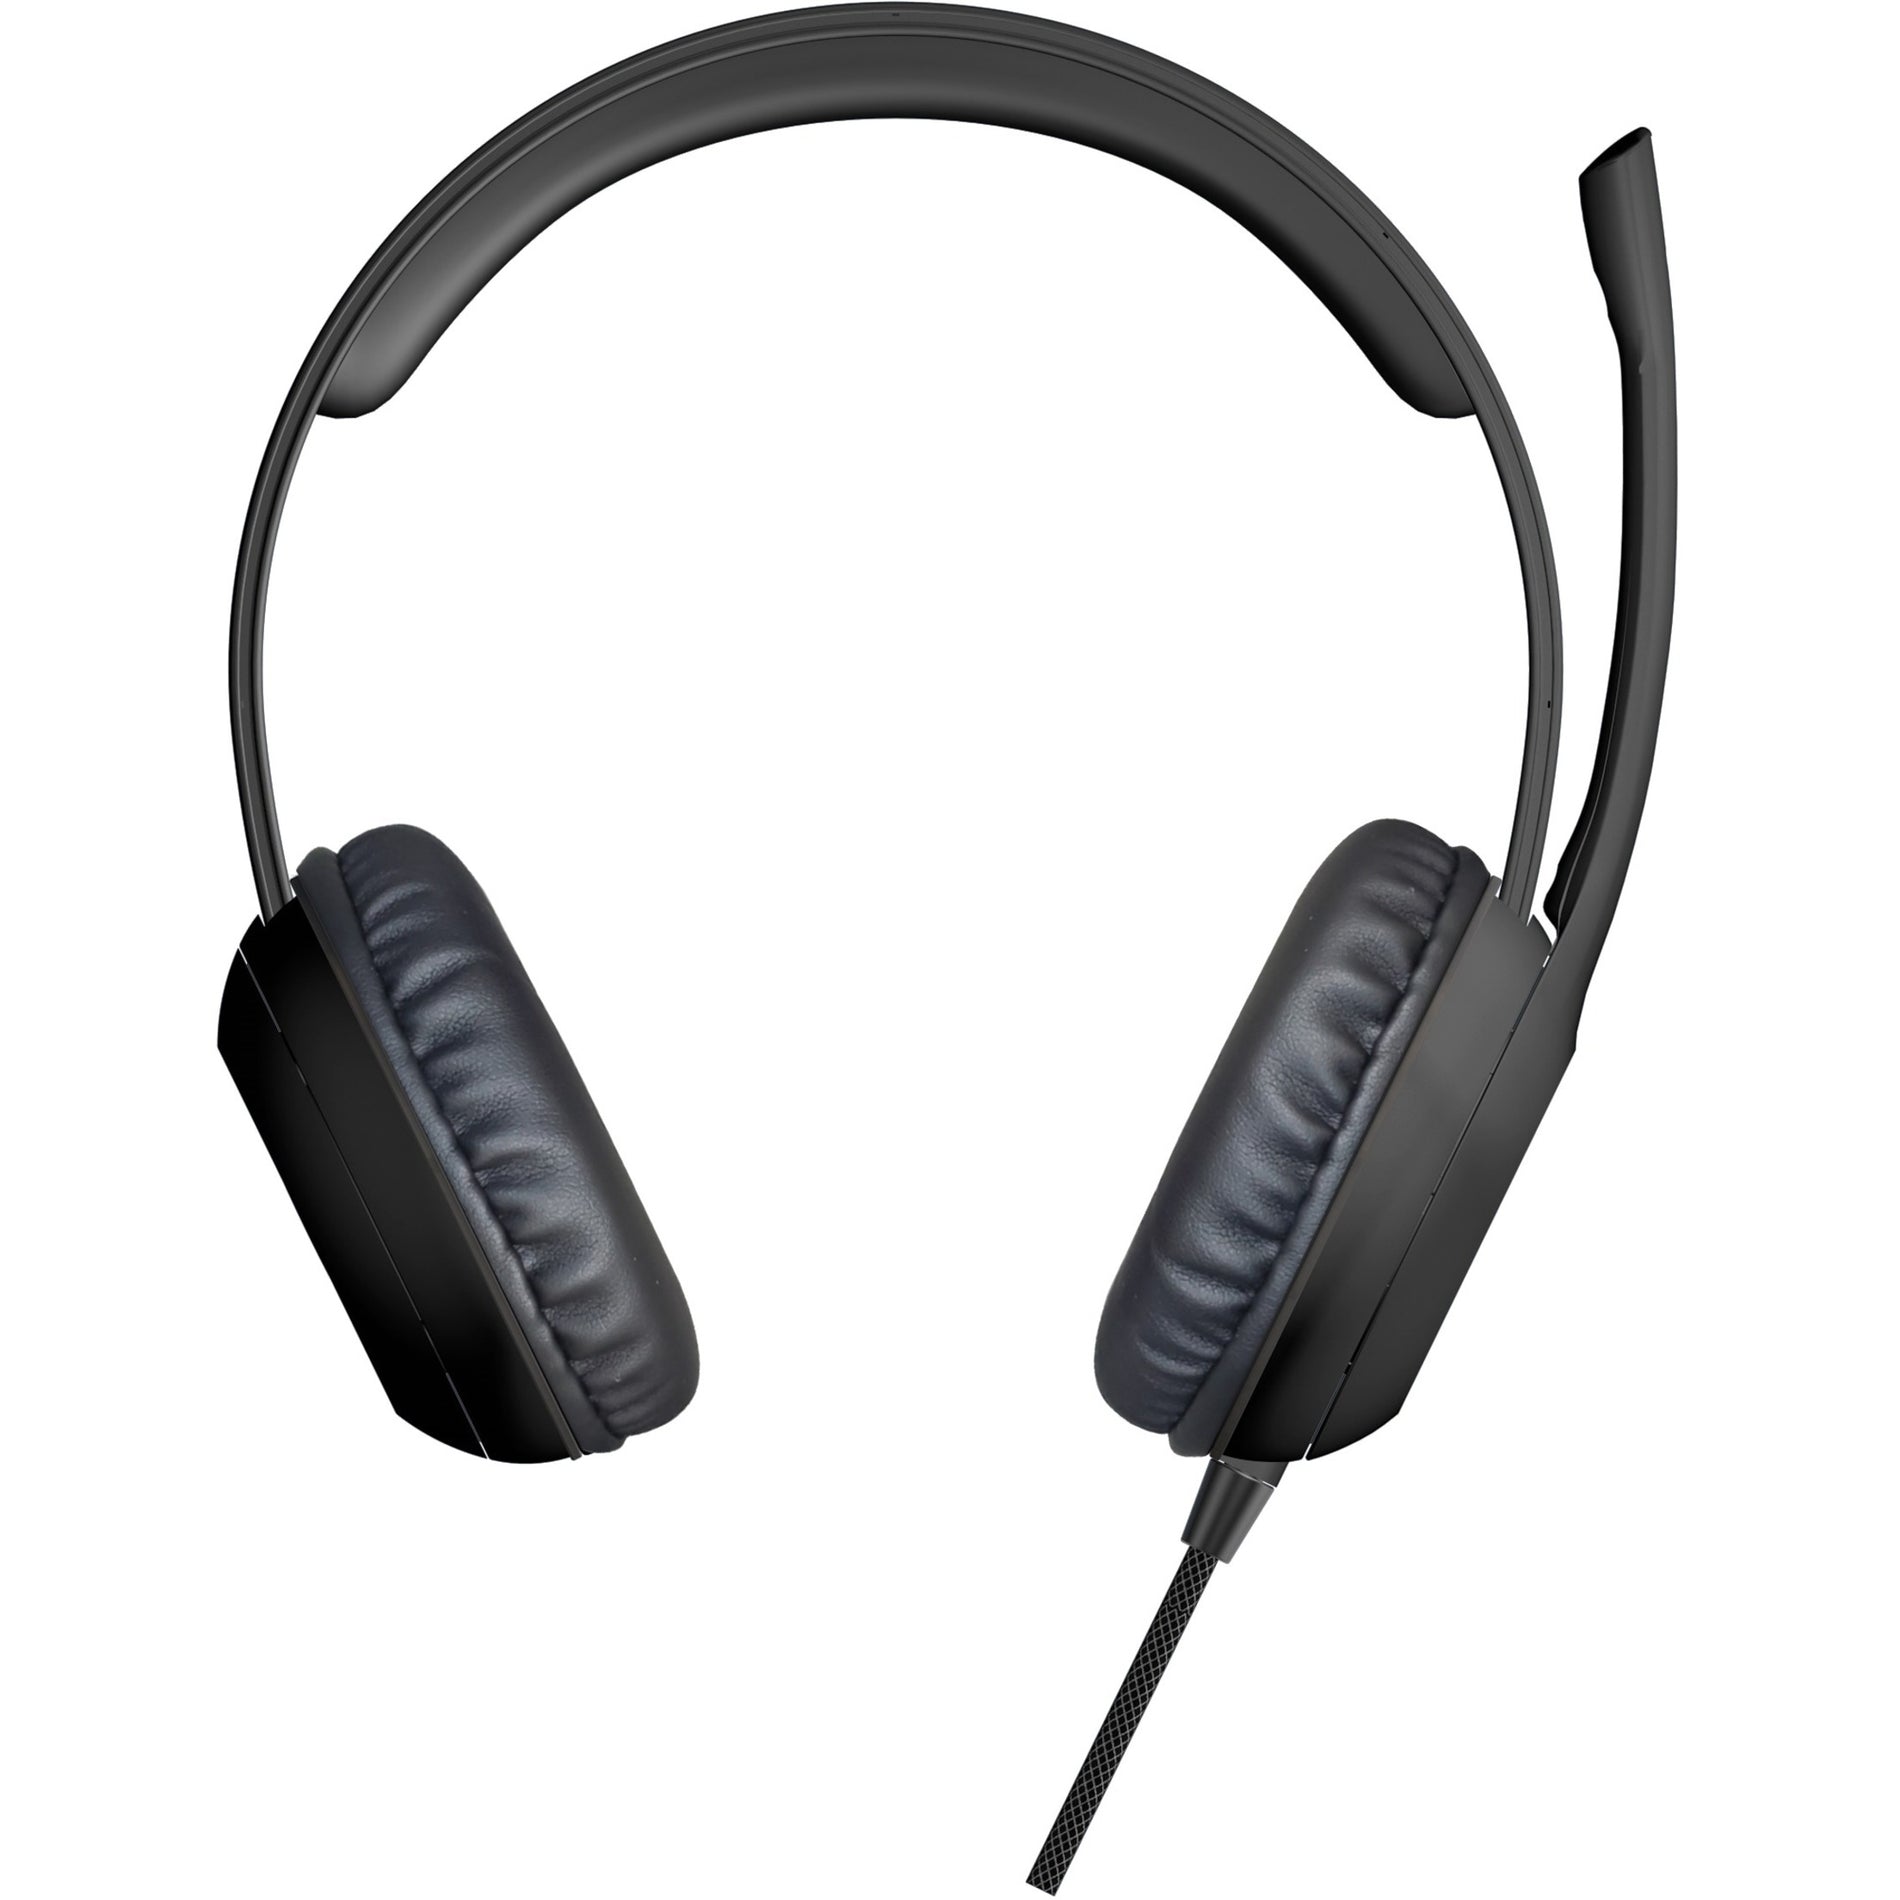 Cyber Acoustics AC-5812 Stereo Headset med USB & 35 mm Tangle-free kabel LED-indikator Mute-knap Justerbart hovedbånd